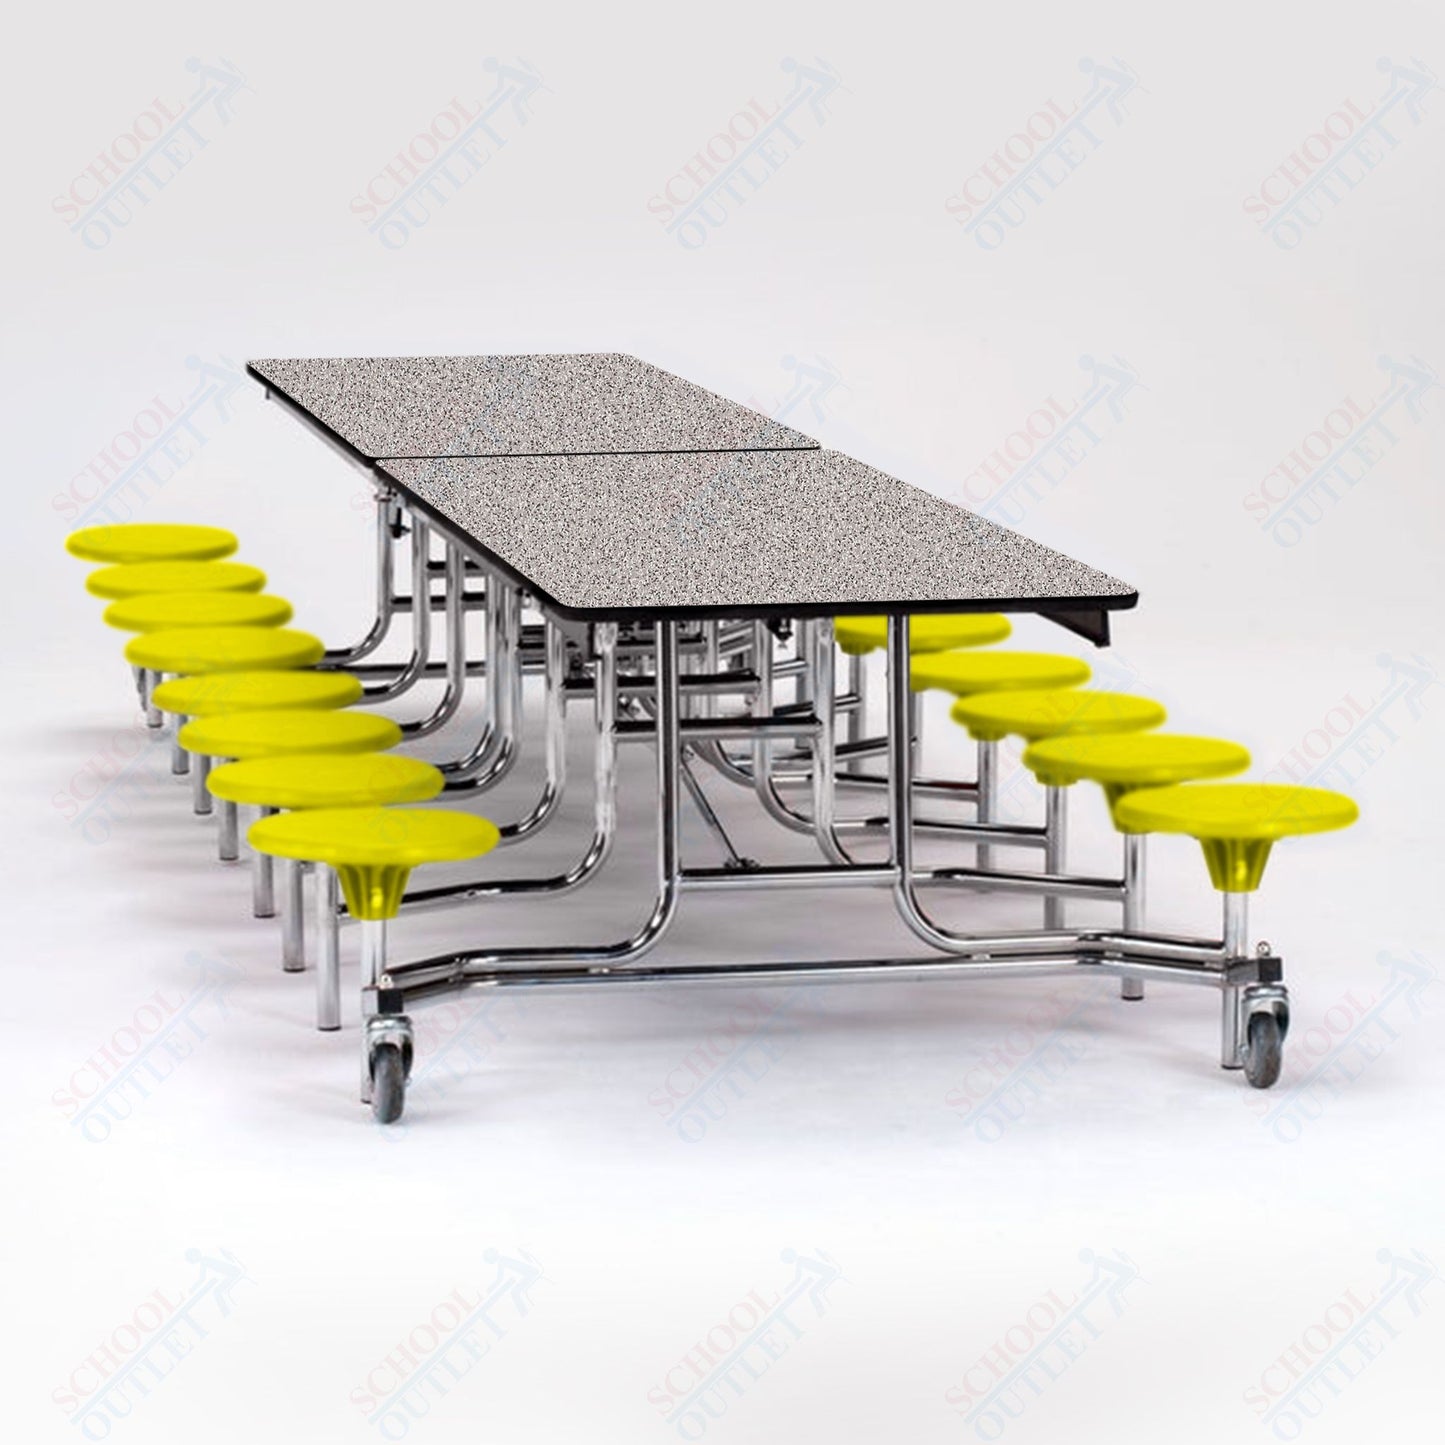 NPS Mobile Cafeteria Table - 30" W x 12' L - 16 Stools - Plywood Core - Protect Edge - Chrome Frame